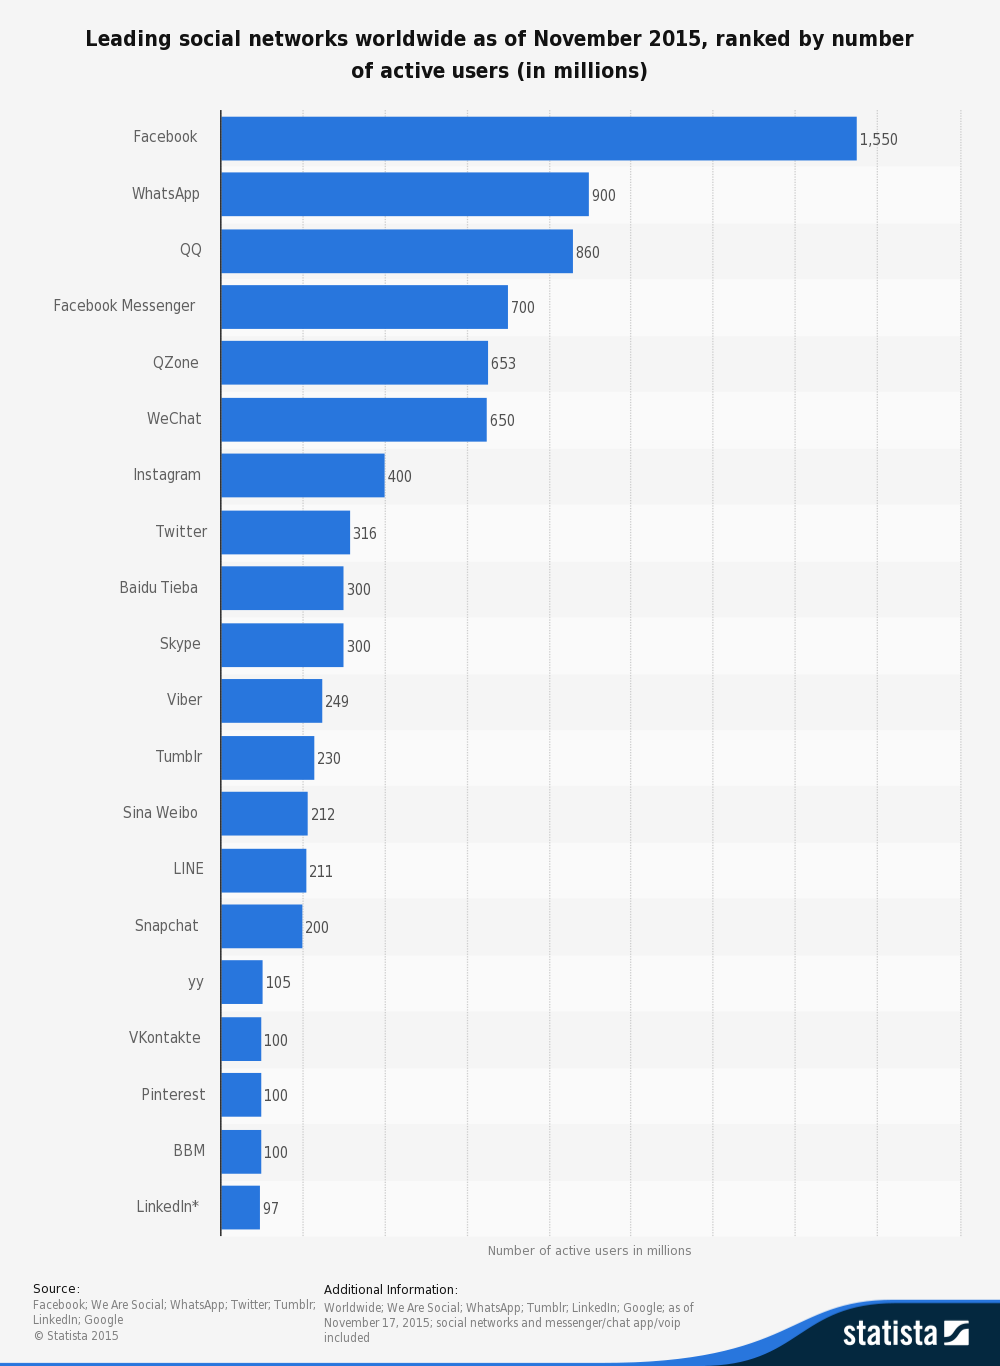 Infographic by Statista on Global Social Networks ranked by users to help find the right channel for your international social media marketing strategy